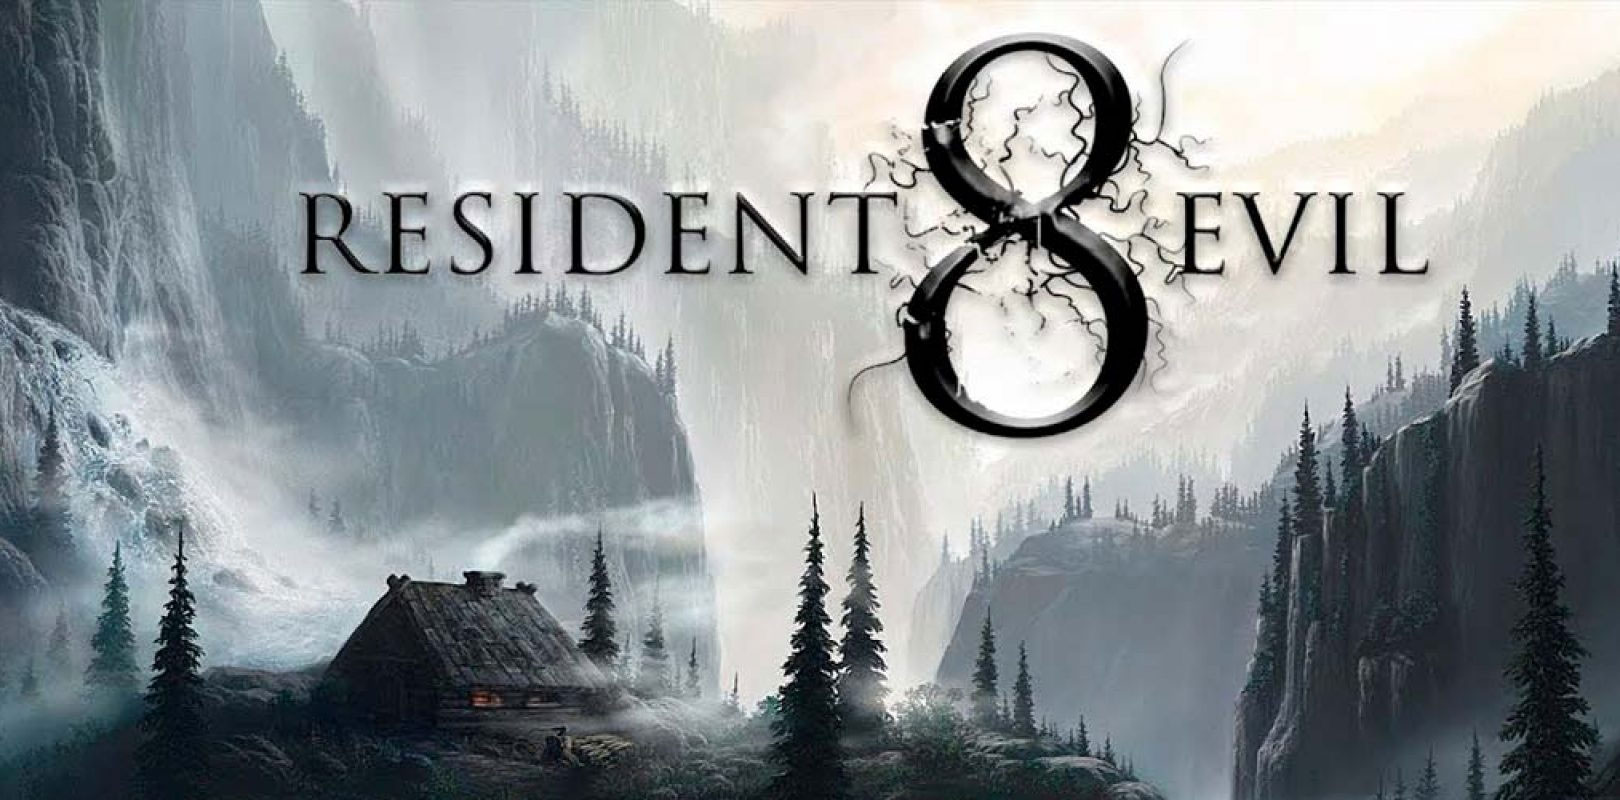 Resident evil village steam is currently фото 51